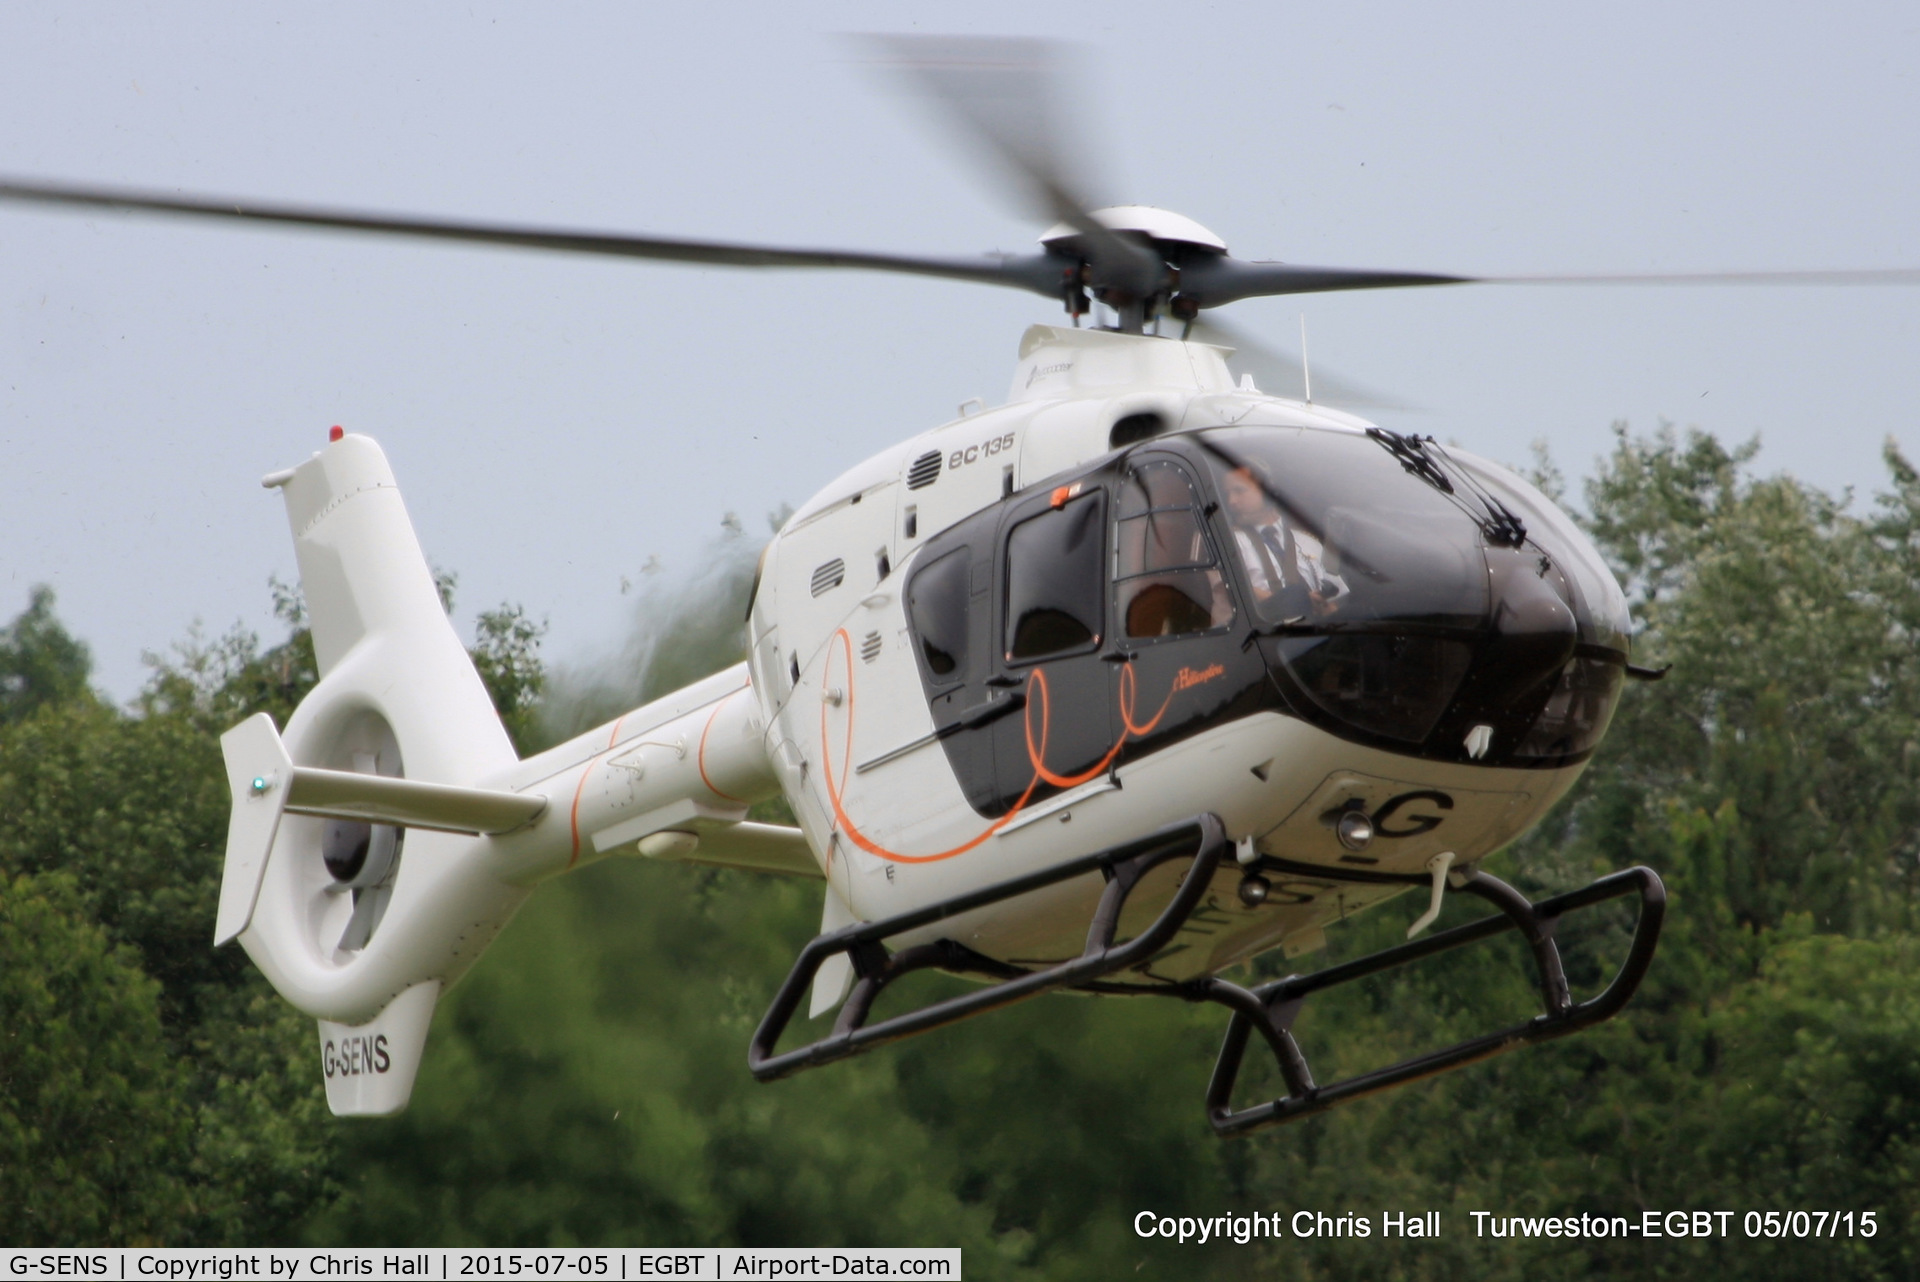 G-SENS, 2009 Eurocopter EC-135T-2+ C/N 0833, ferrying race fans to the British F1 Grand Prix at Silverstone